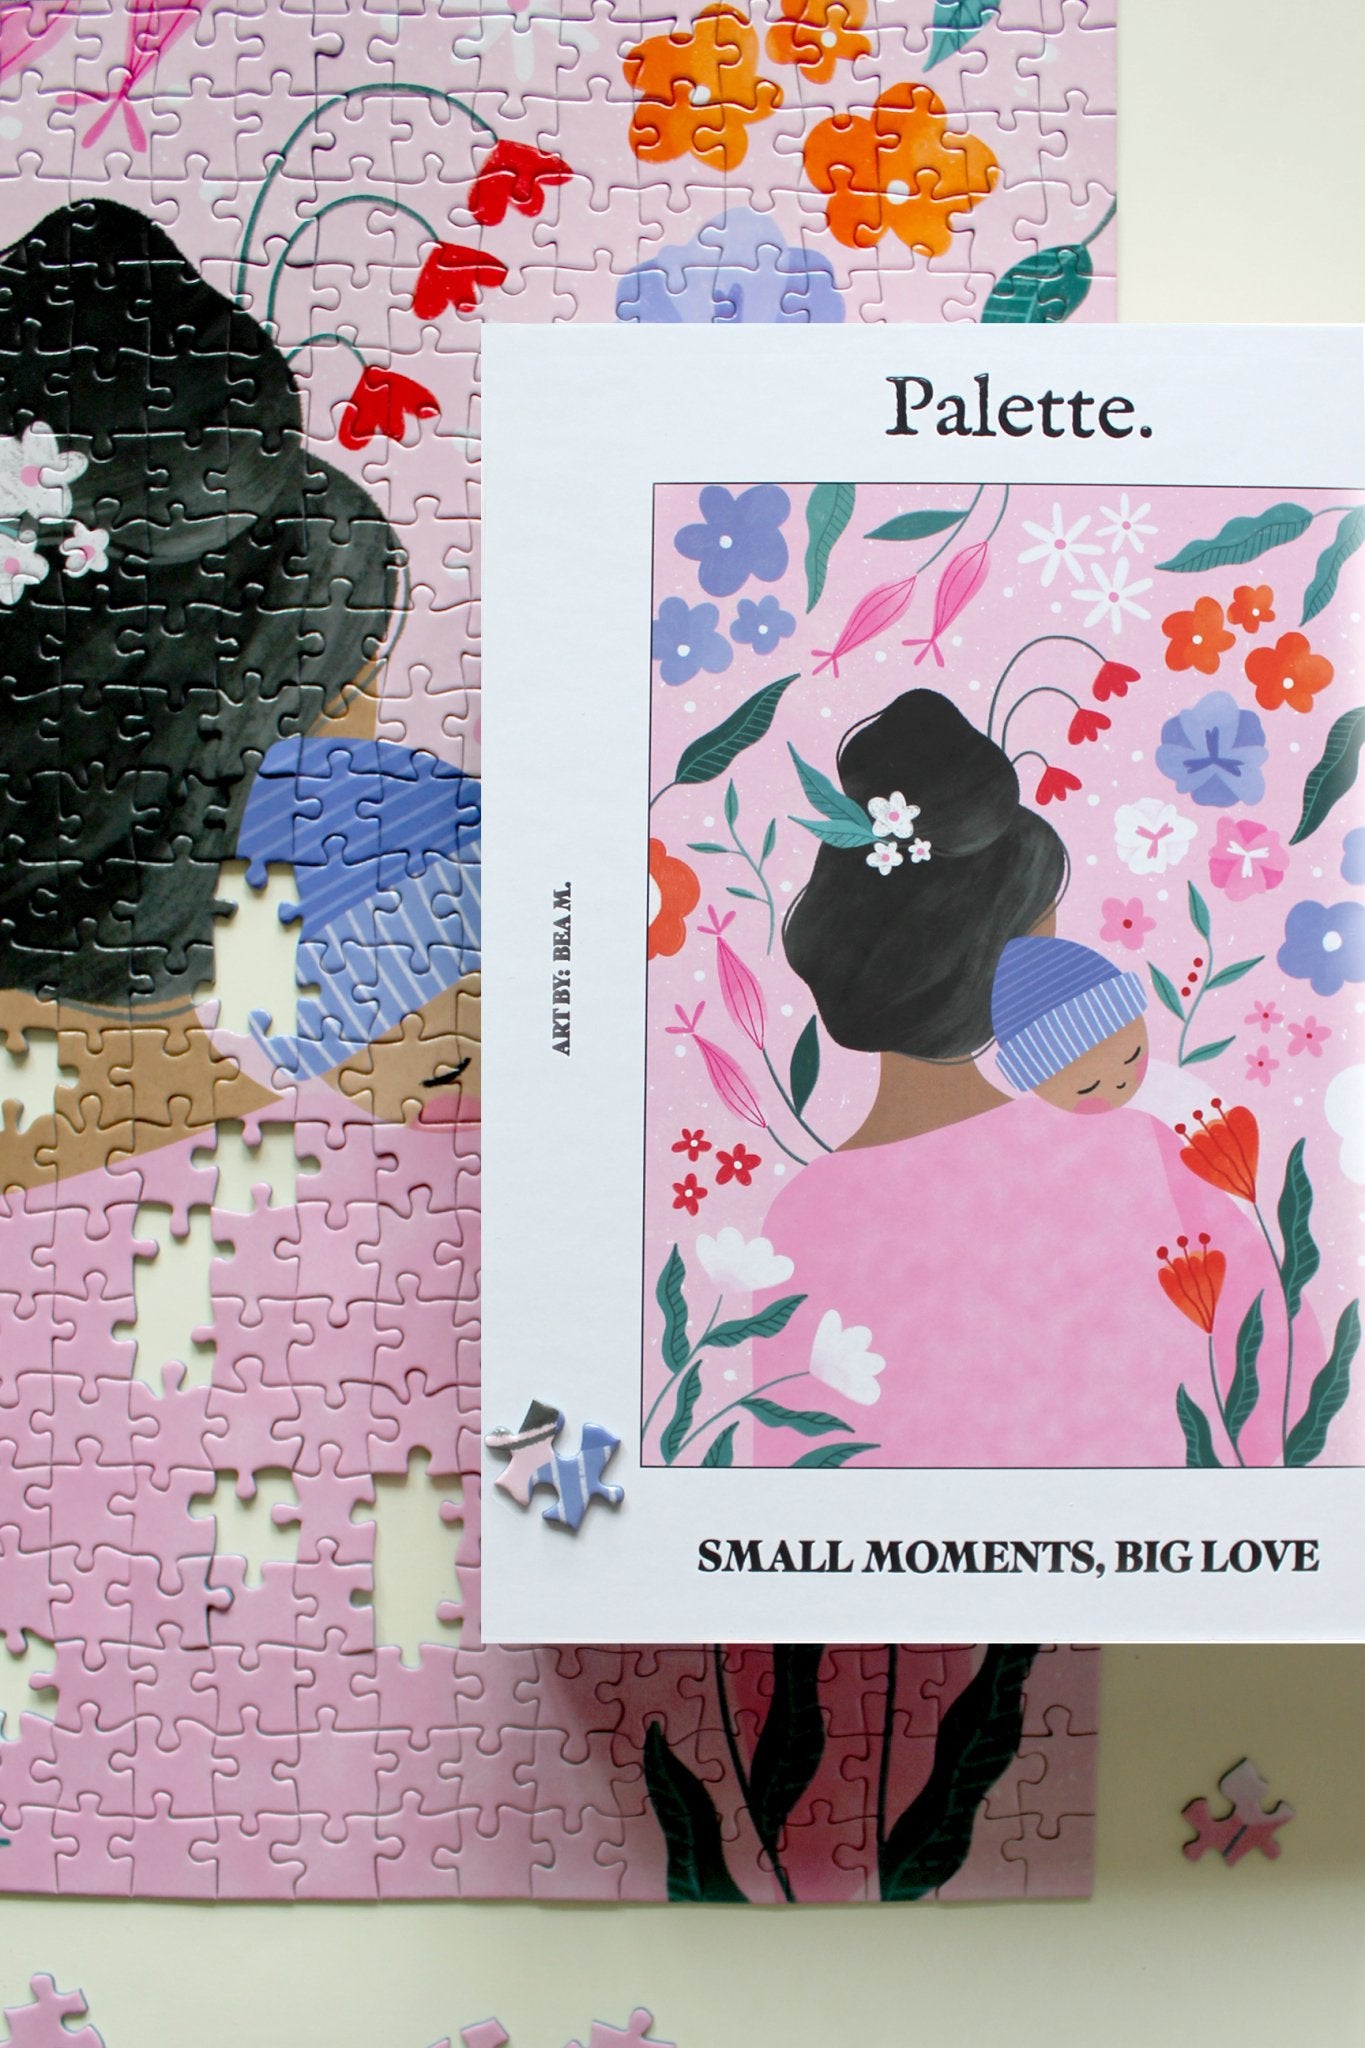 Small Moments, Big Love - Palettepuzzle